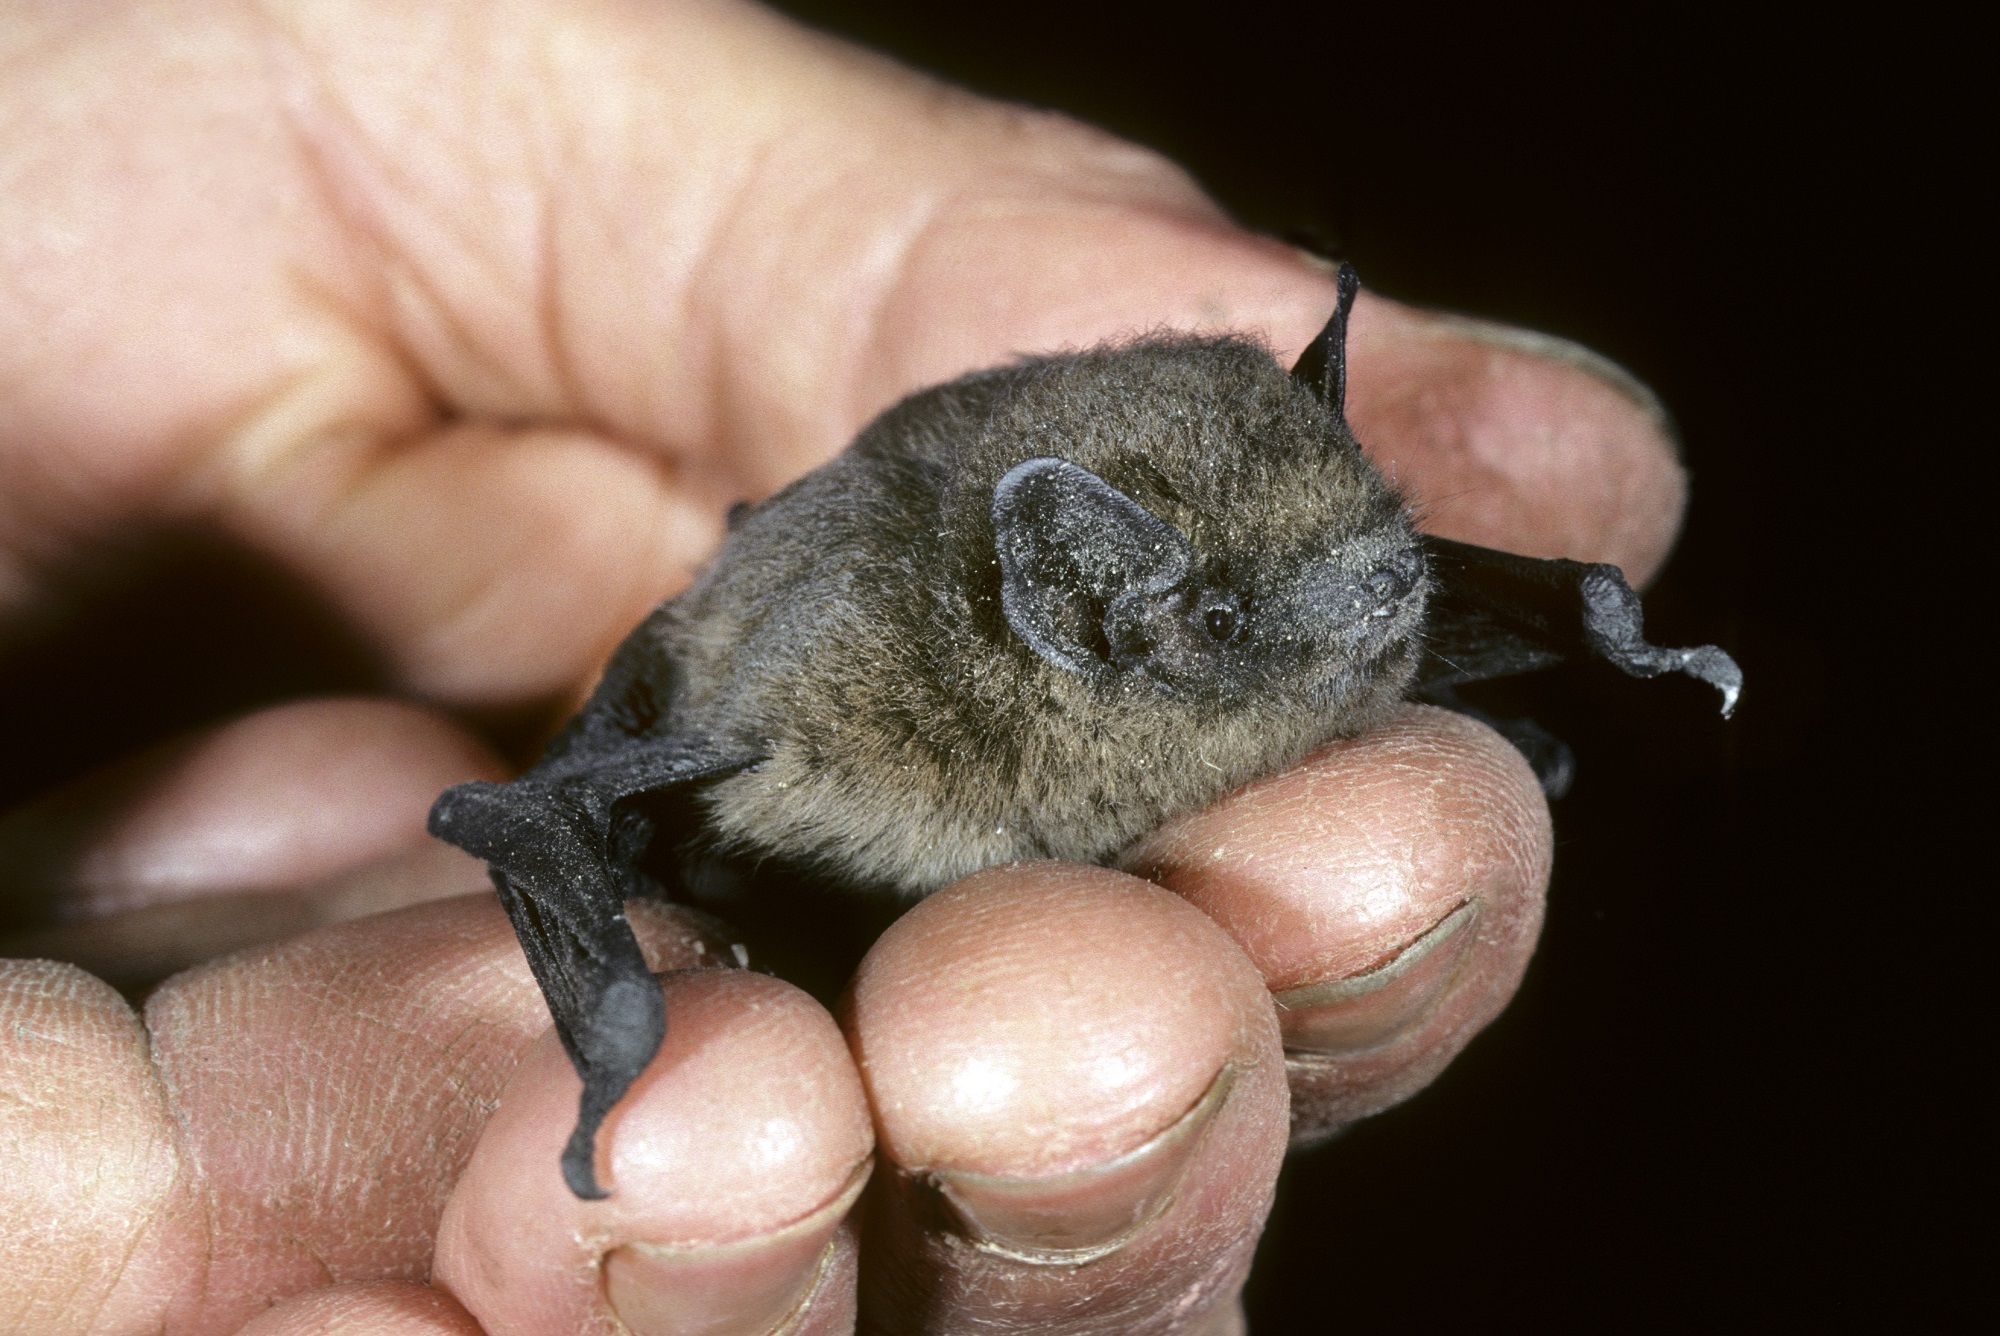 Small brown-black migratory bat help in a person's hand with head facing camera